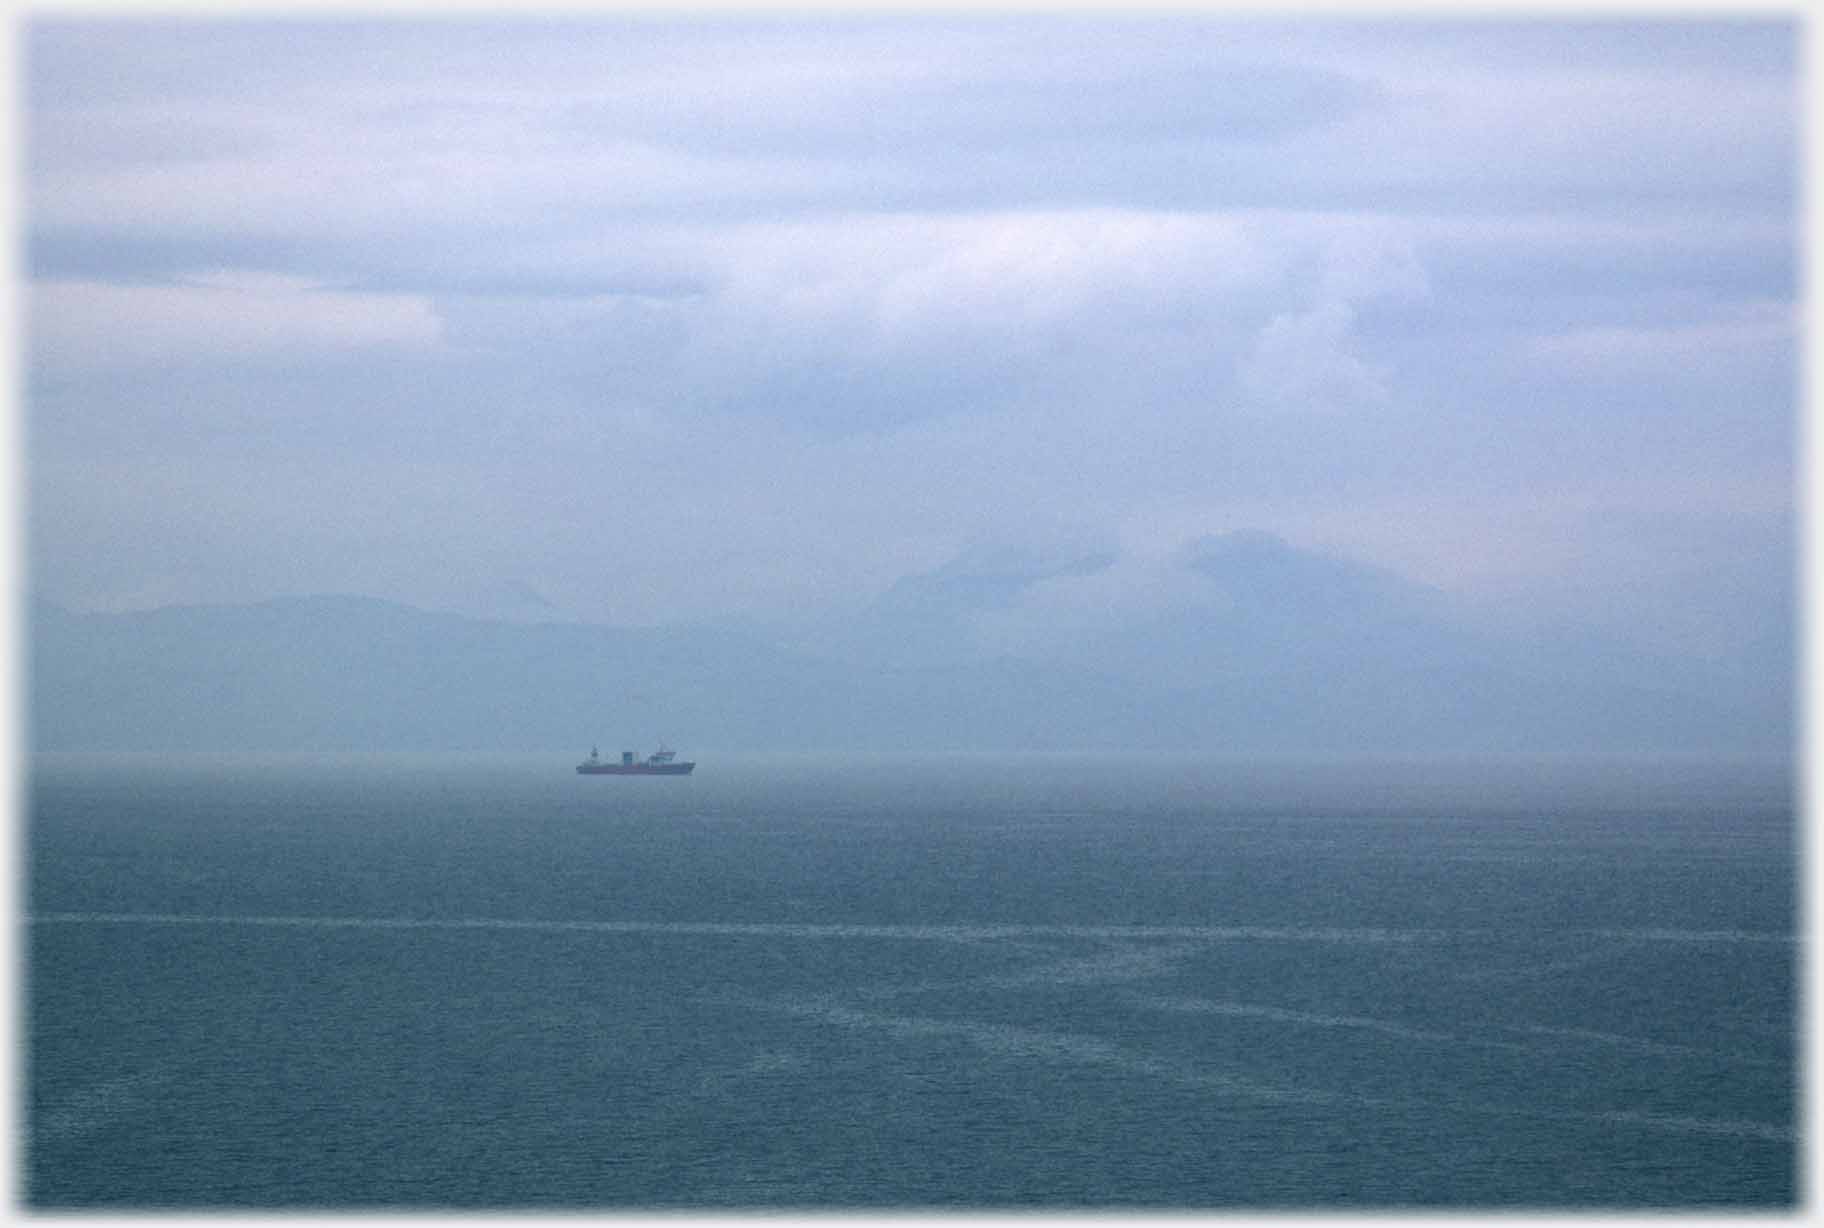 Ship in middle distance and mist covered hills beyond.